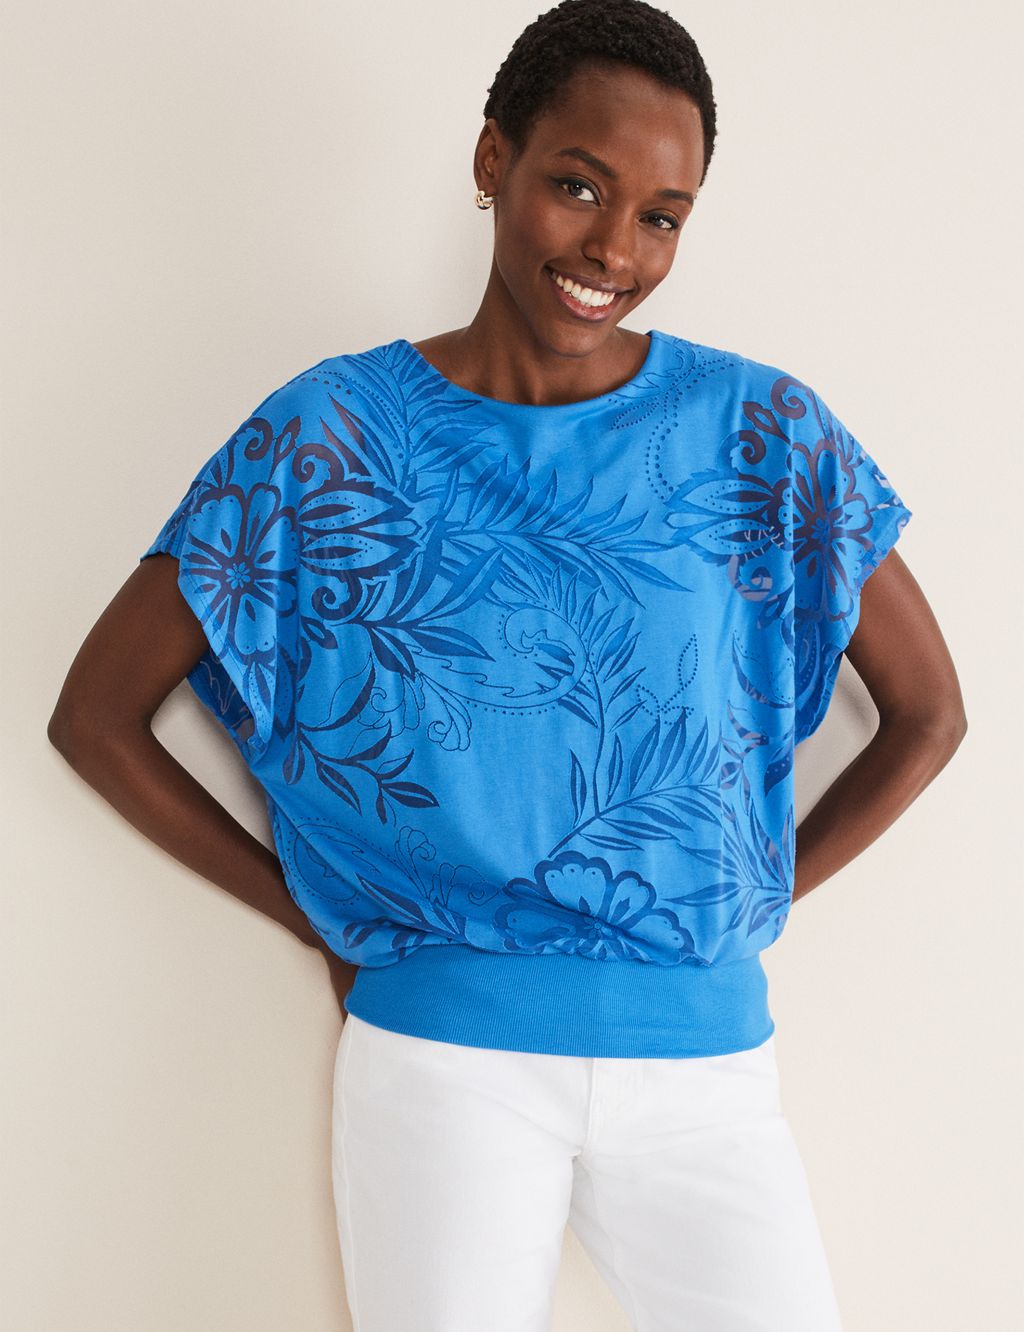 Floral Batwing Top image 1